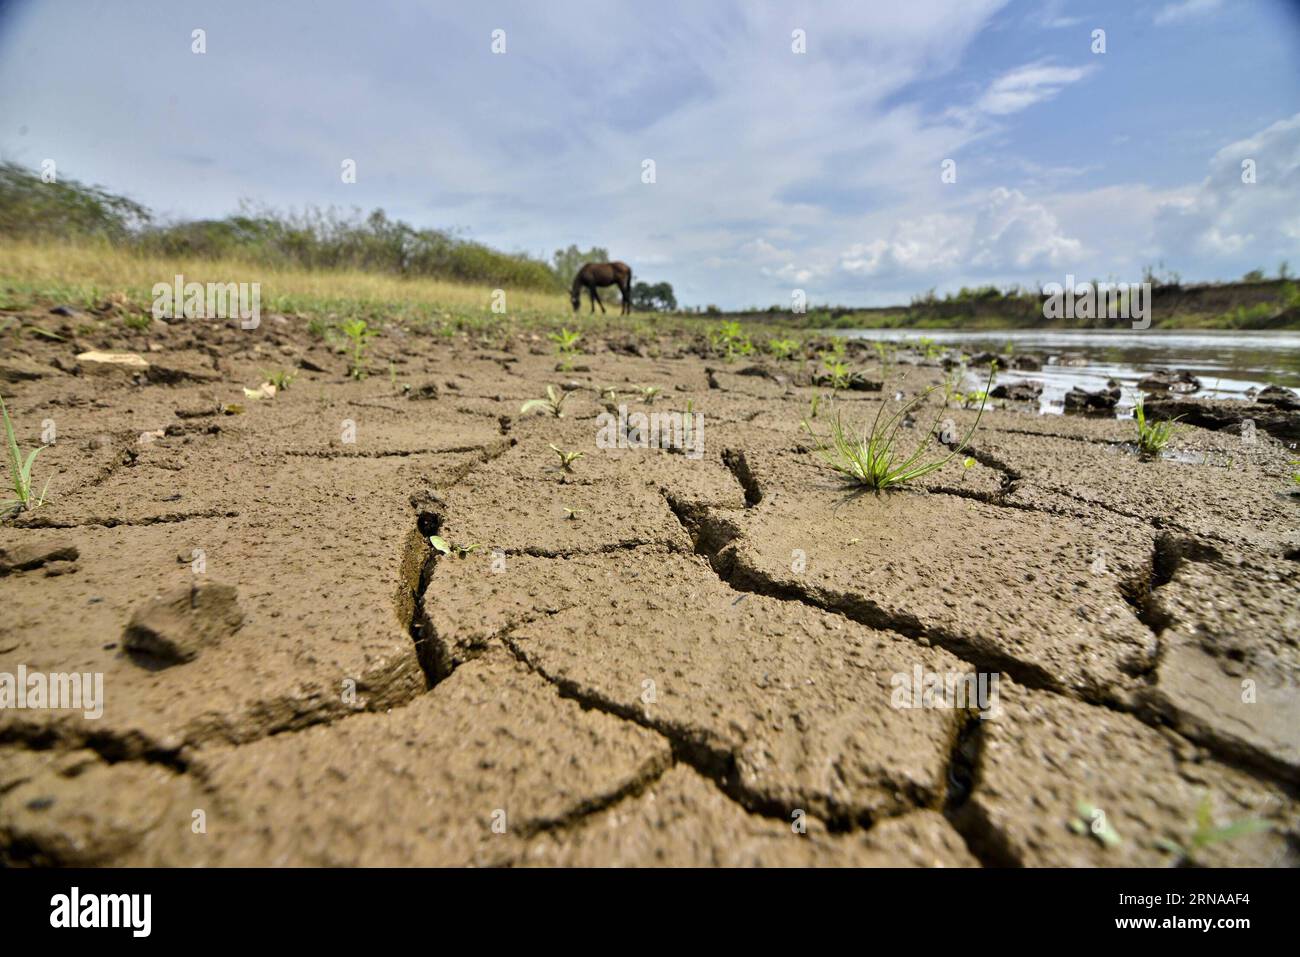 (160117) -- CAUCA, Jan. 17, 2016 -- Undated image shows a view of the soil cracked in the Cauca River on its way between Cauca Valley department and Cauca department, Colombia. Although rains have been registered this week and partly relieve the drought in some rivers of the country, the basins of the rivers Magdalena and Cauca remain the most affected by the season of El Nioo, according to information from the Institute of Meteorology, Hydrology and Environmental Studies (IDEAM, for its acronym in Spanish) of Colombia.Jorge Orozco/COLPRENSA) (jp) (fnc) COLOMBIA-CAUCA-ENVIRONMENT-RIVERS-FEATUR Stock Photo